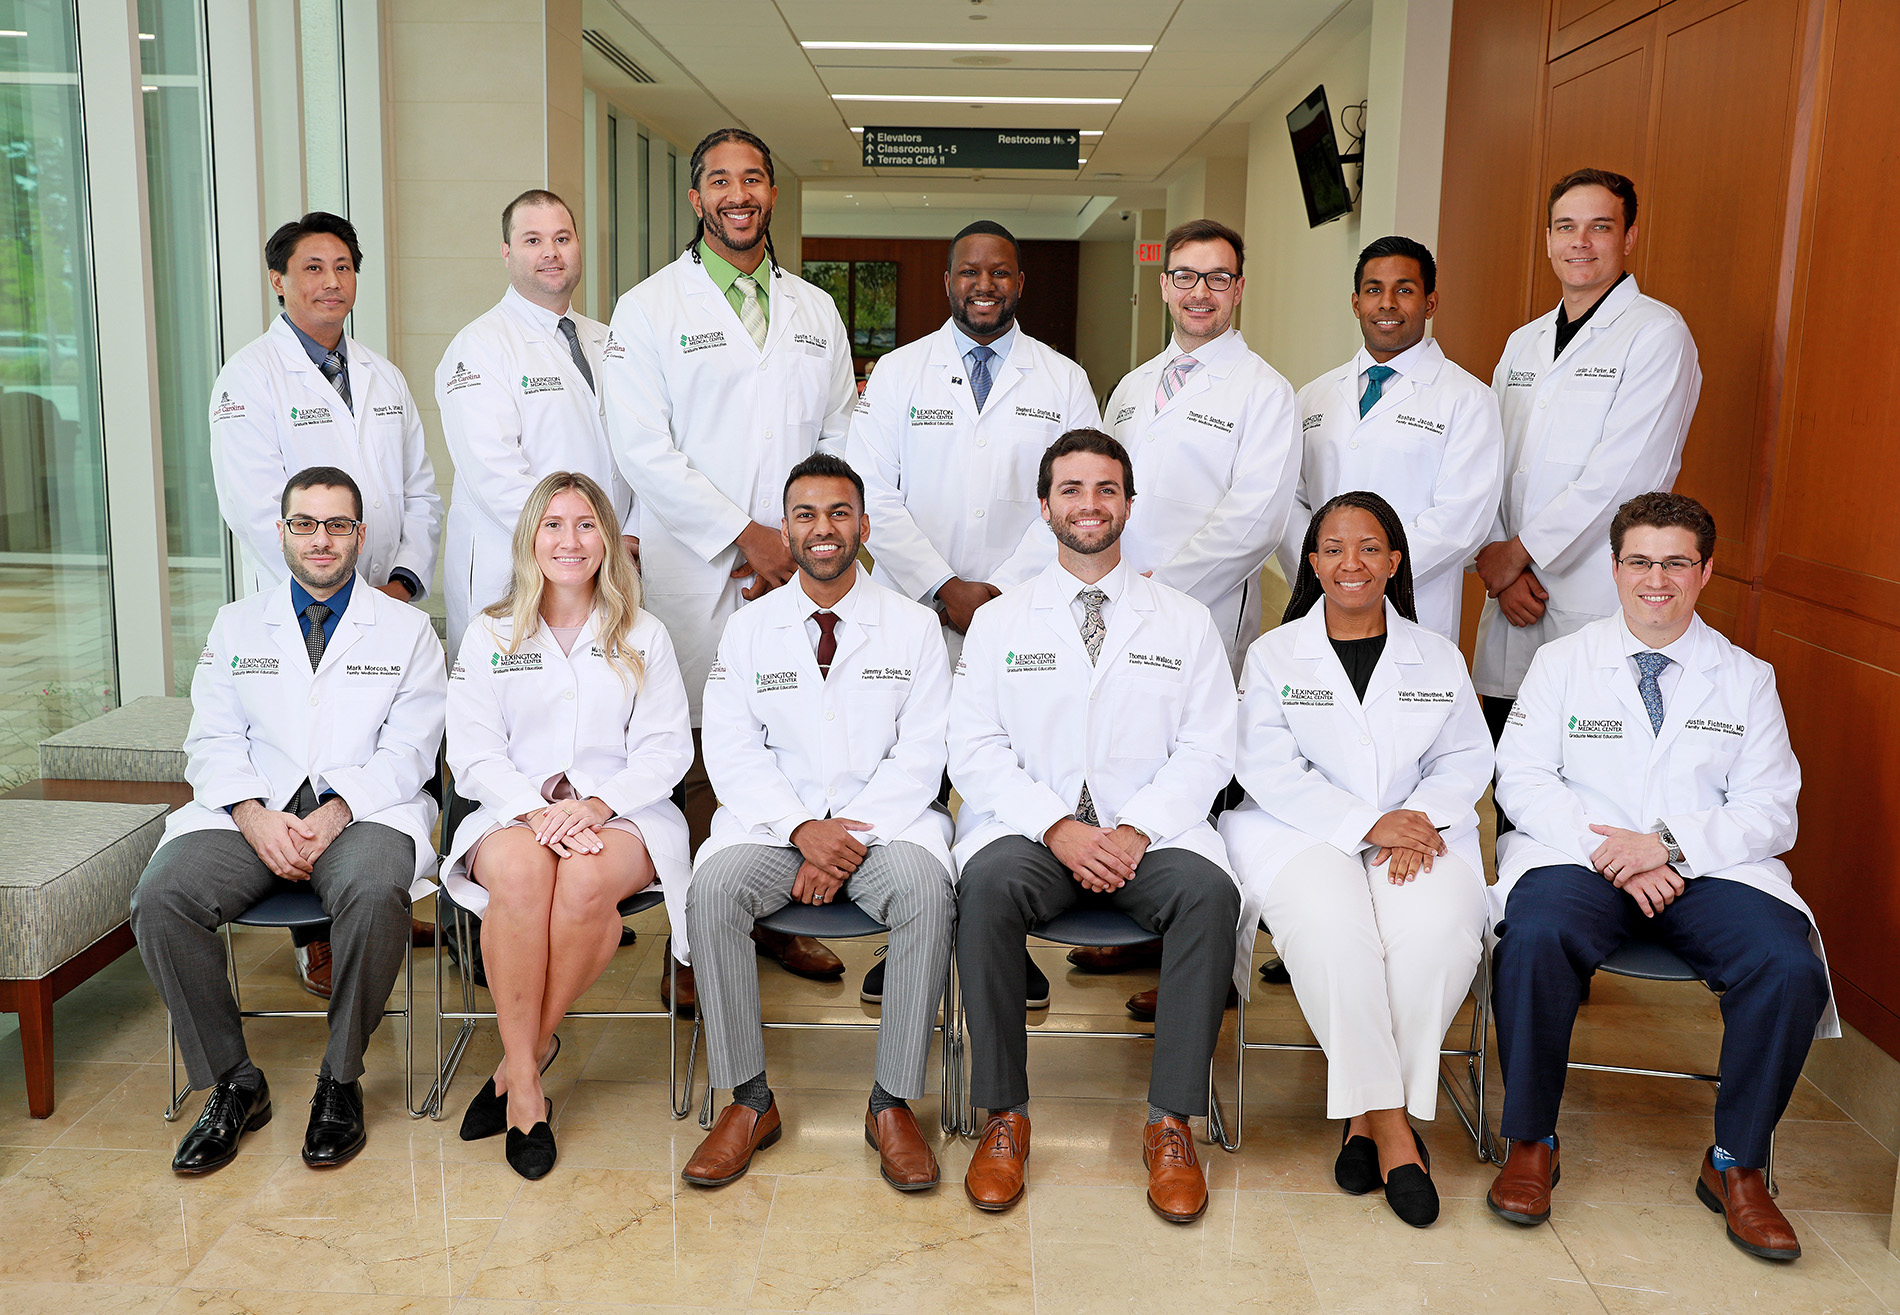 Group photo of 13 Family Medicine residents